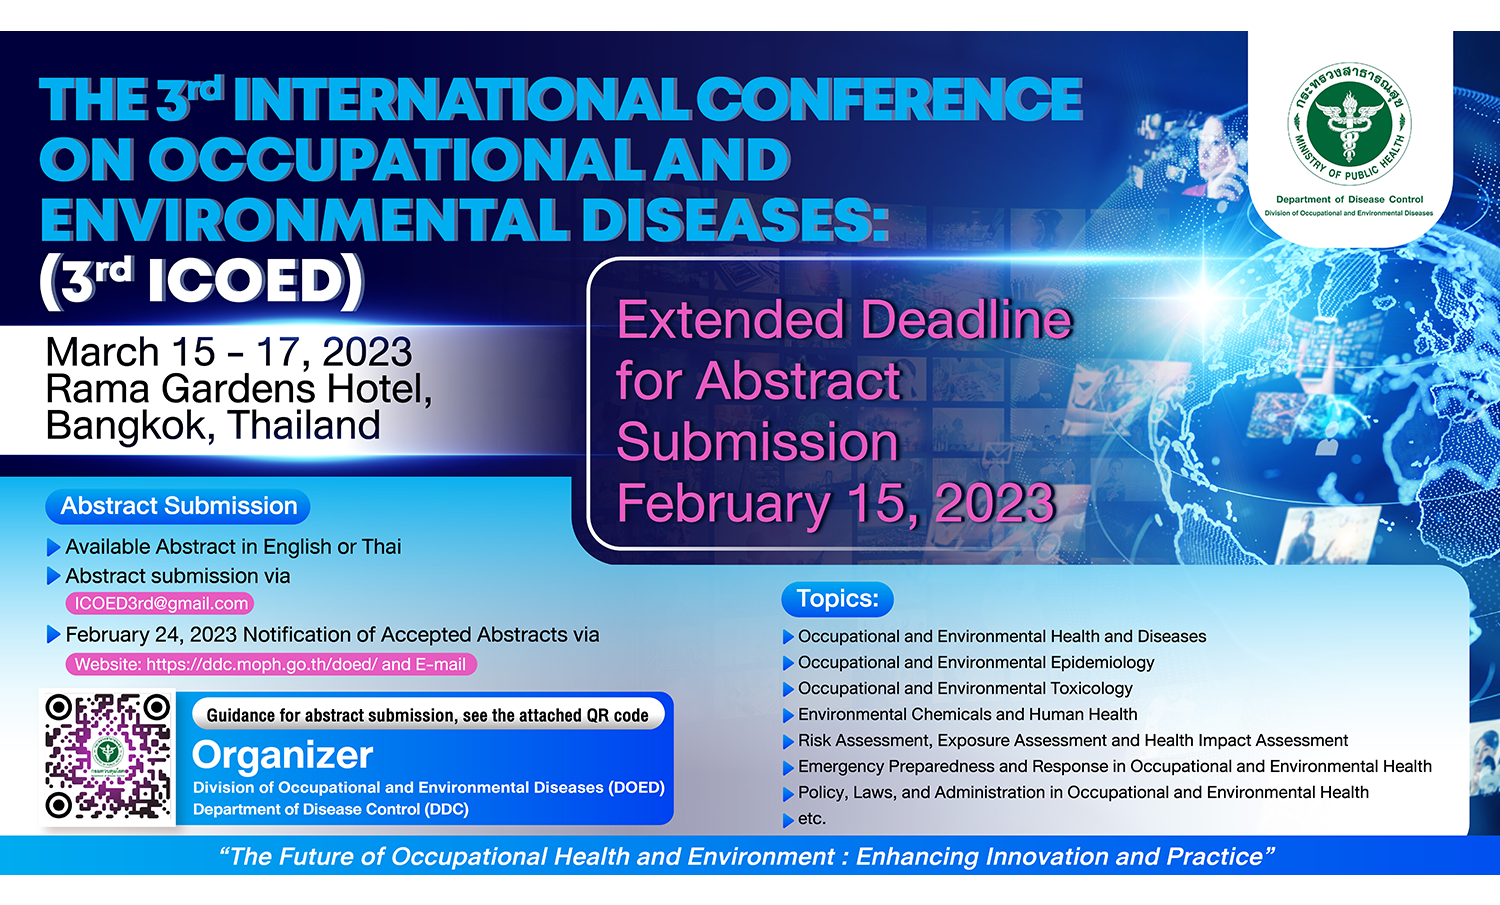 The 3rd International Conference Occupational and Environmental Diseases